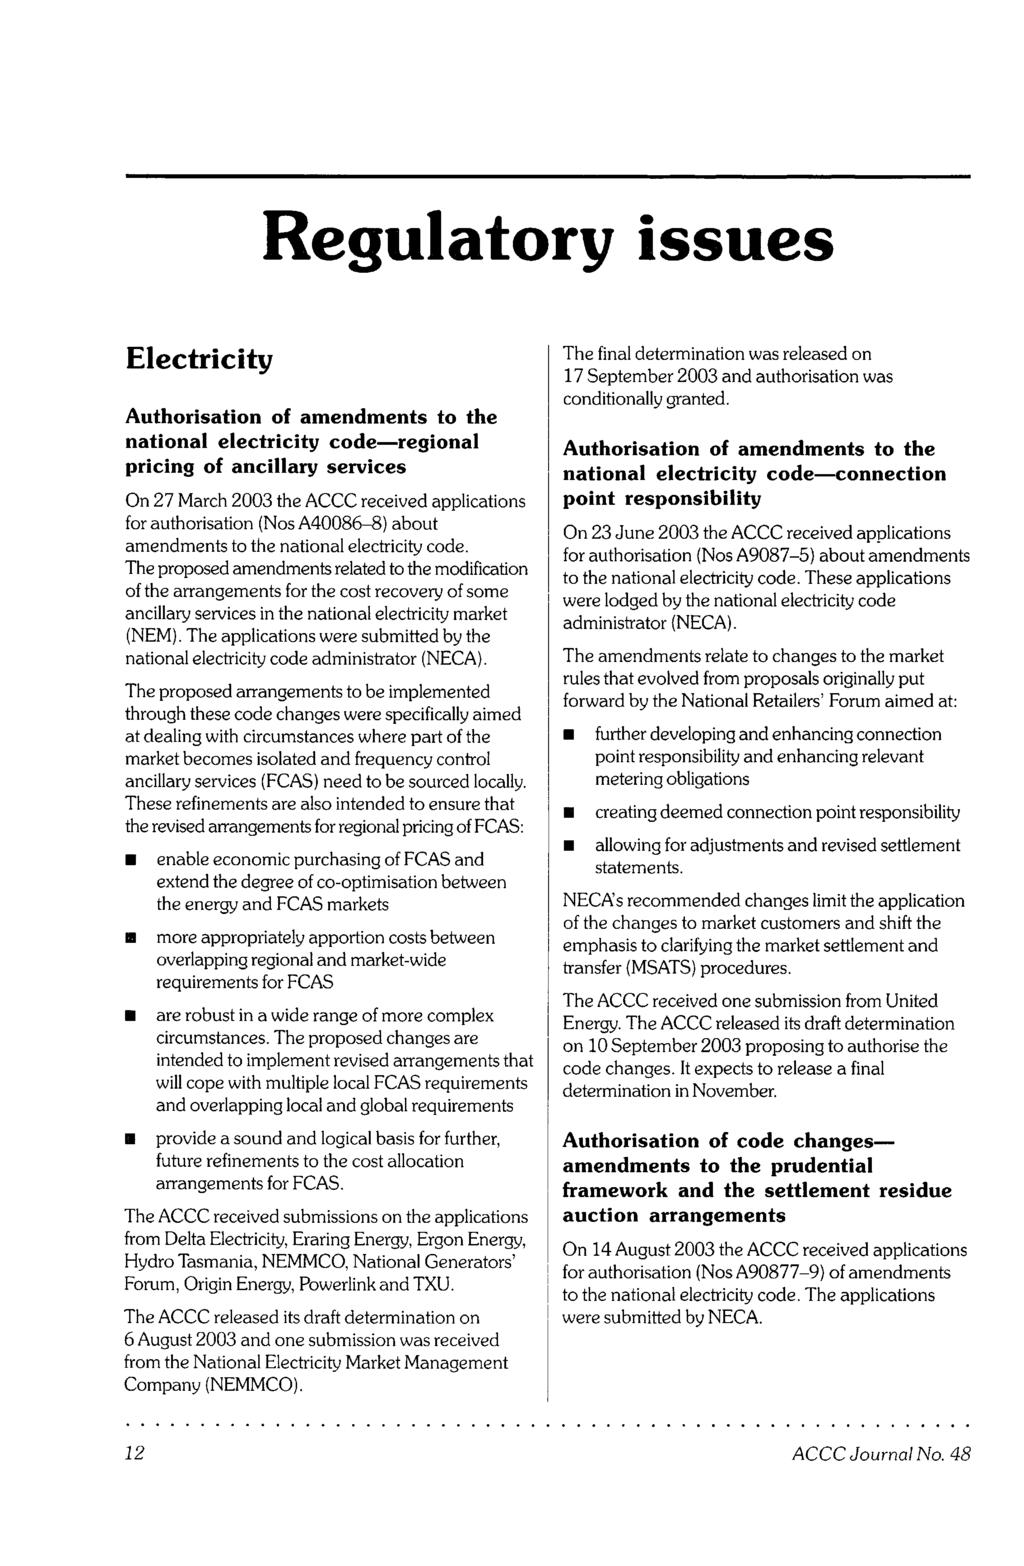 Electricity Authorisation of amendments to the national electricity code regional pricing of ancillary services On 27 March 2003 the ACCC received applications for authorisation (Nos A40086-8) about